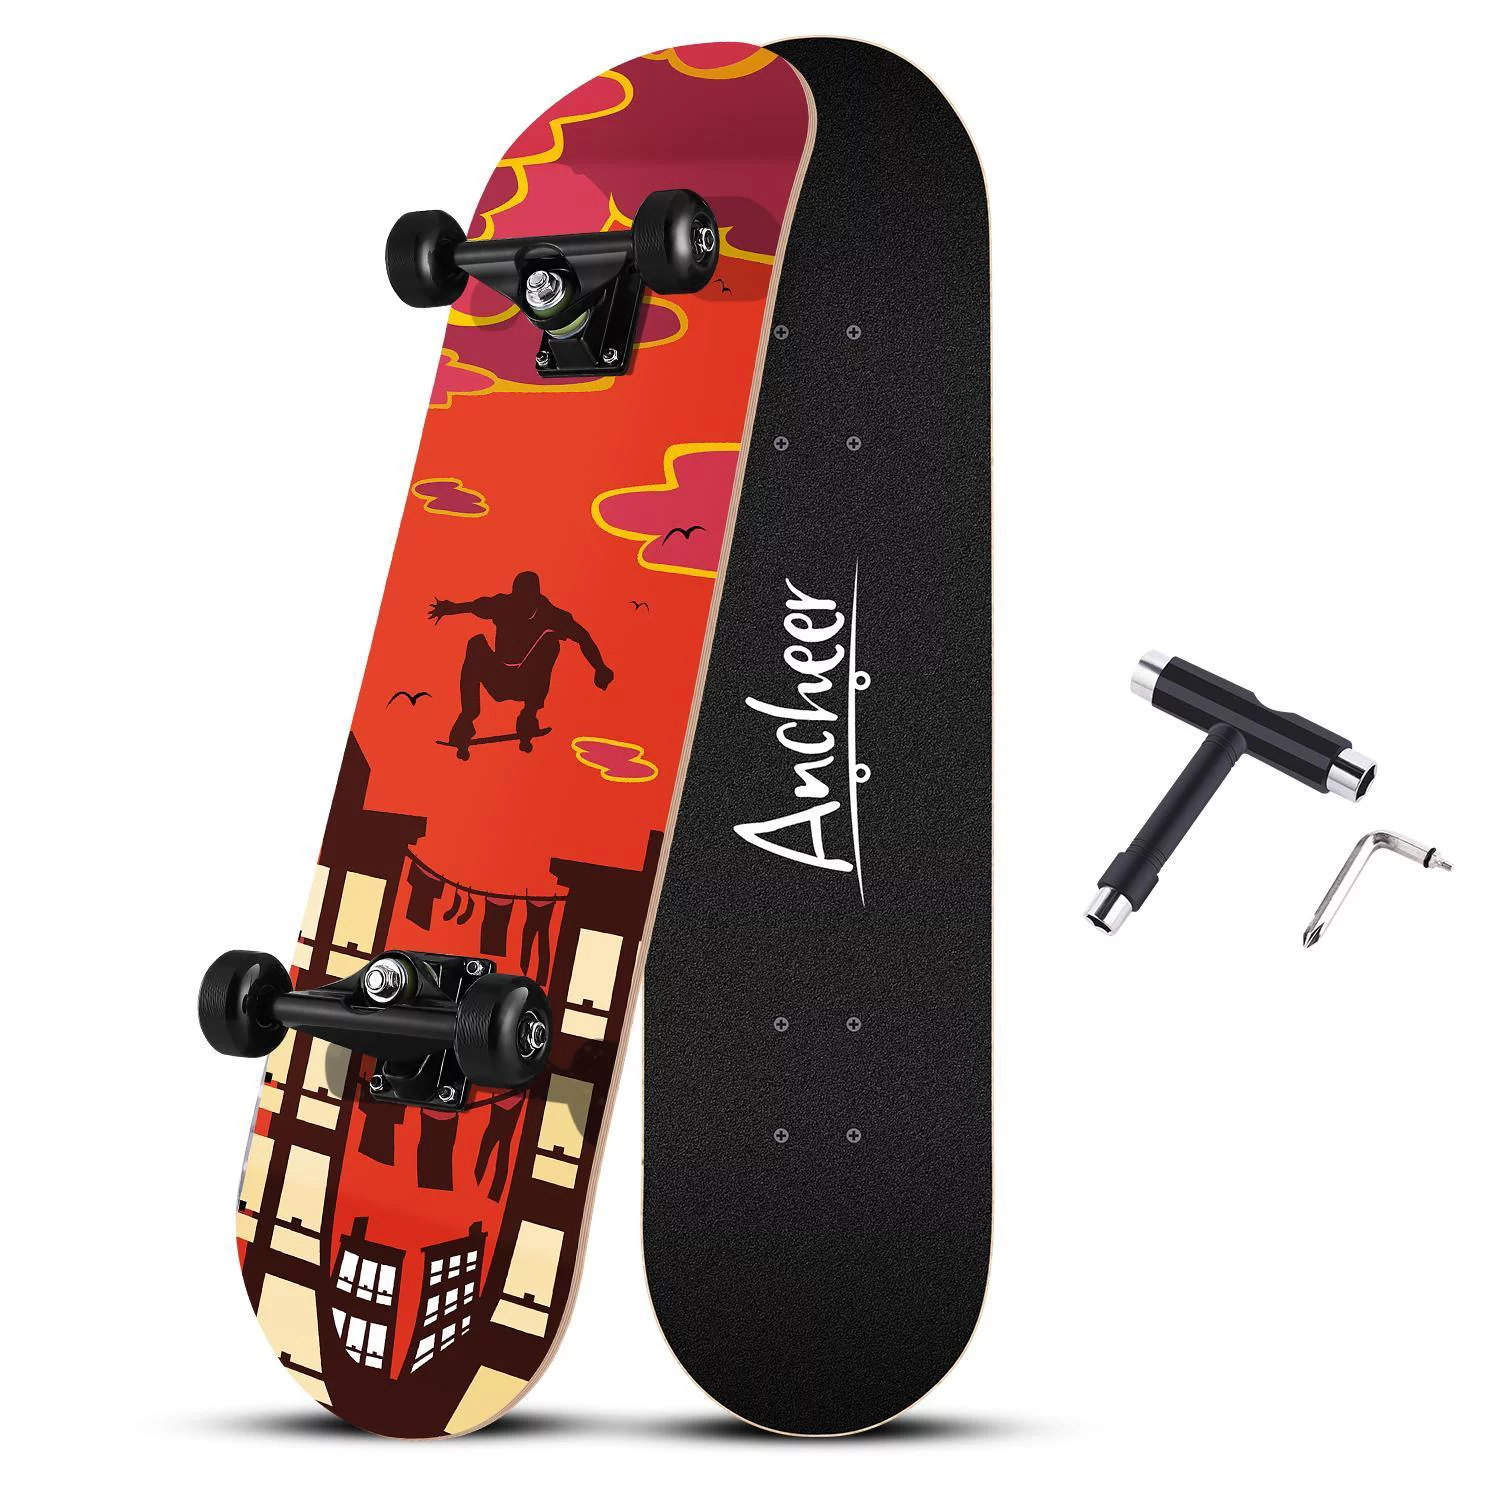 33''Pro Skateboards Cruiser Complete Skateboard Long board, 7 Layer Maple Wood Skate board Deck with ABEC-11 Bearing Perfect Present Gifts for Boys Girls Youths Beginners RllYE